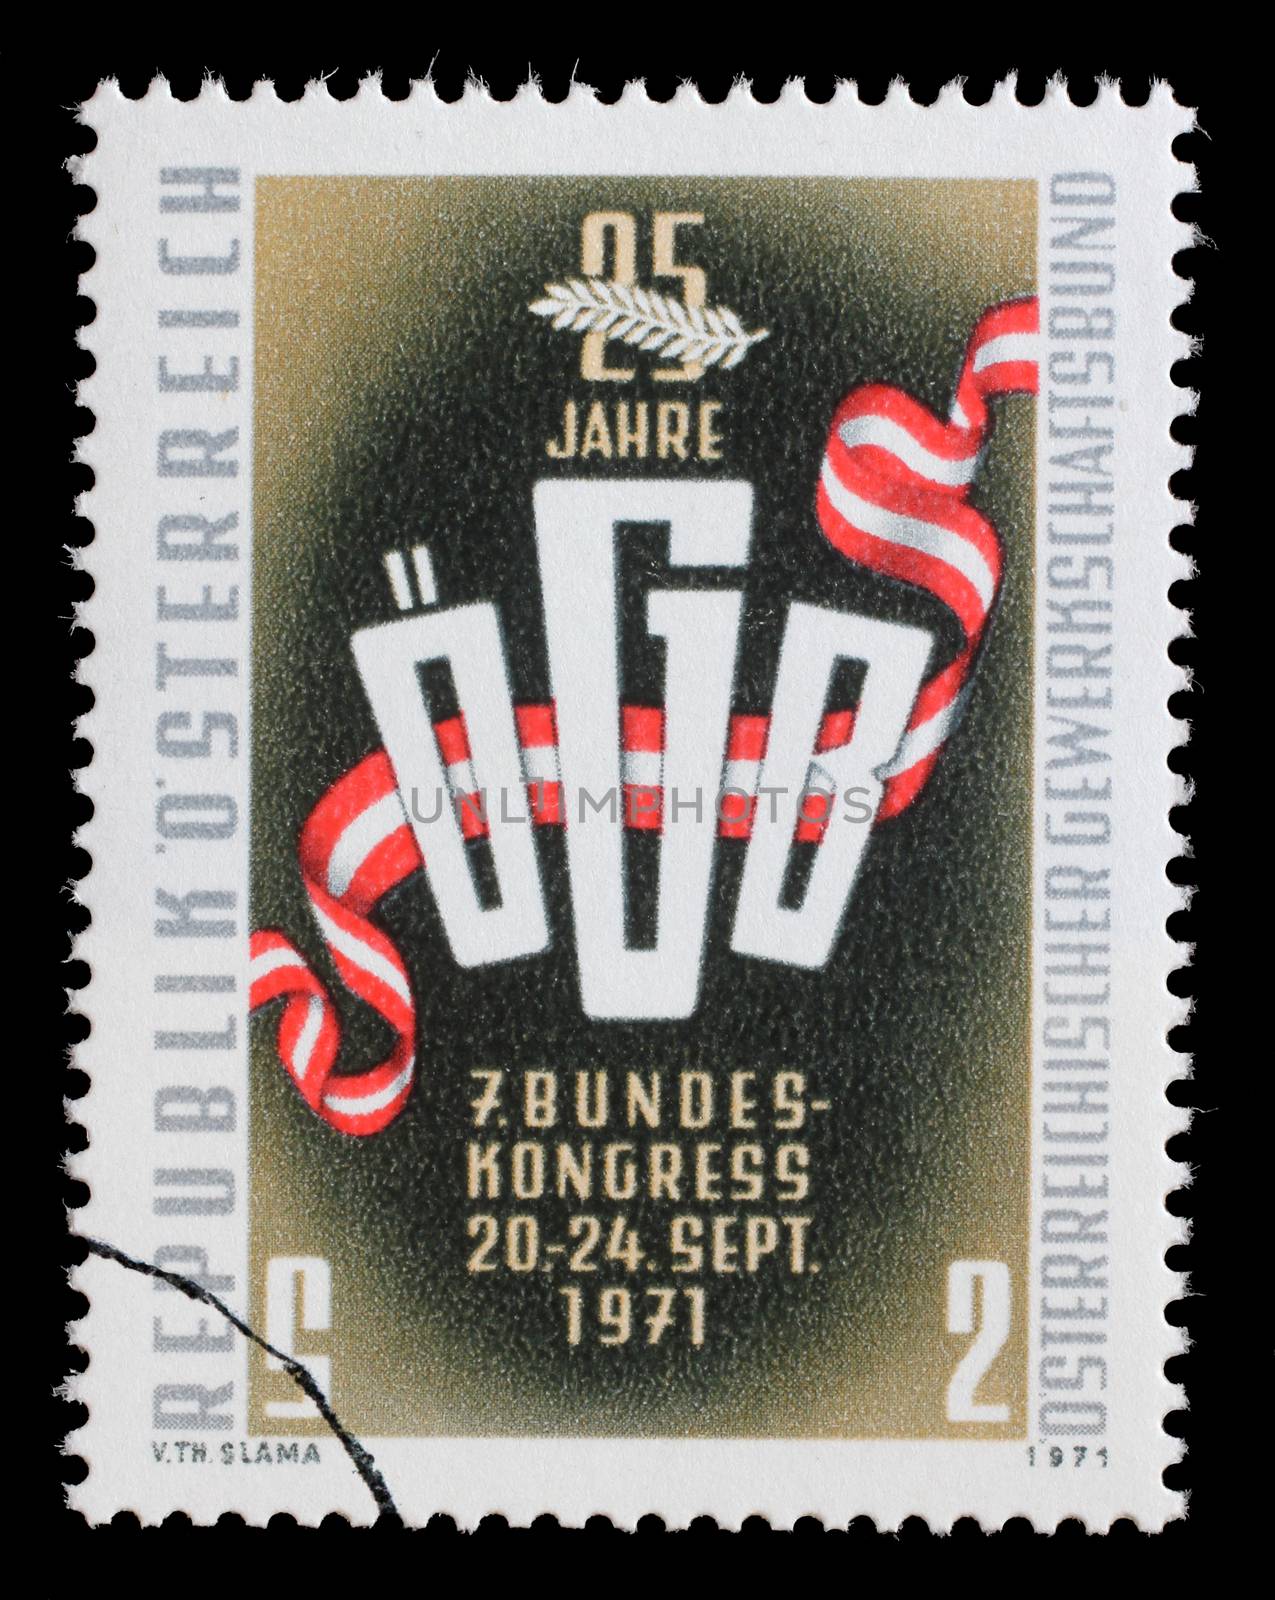 Stamp printed in the Austria shows Trade Union Emblem, 25th Anniversary of Austrian Trade Union Association, circa 1971